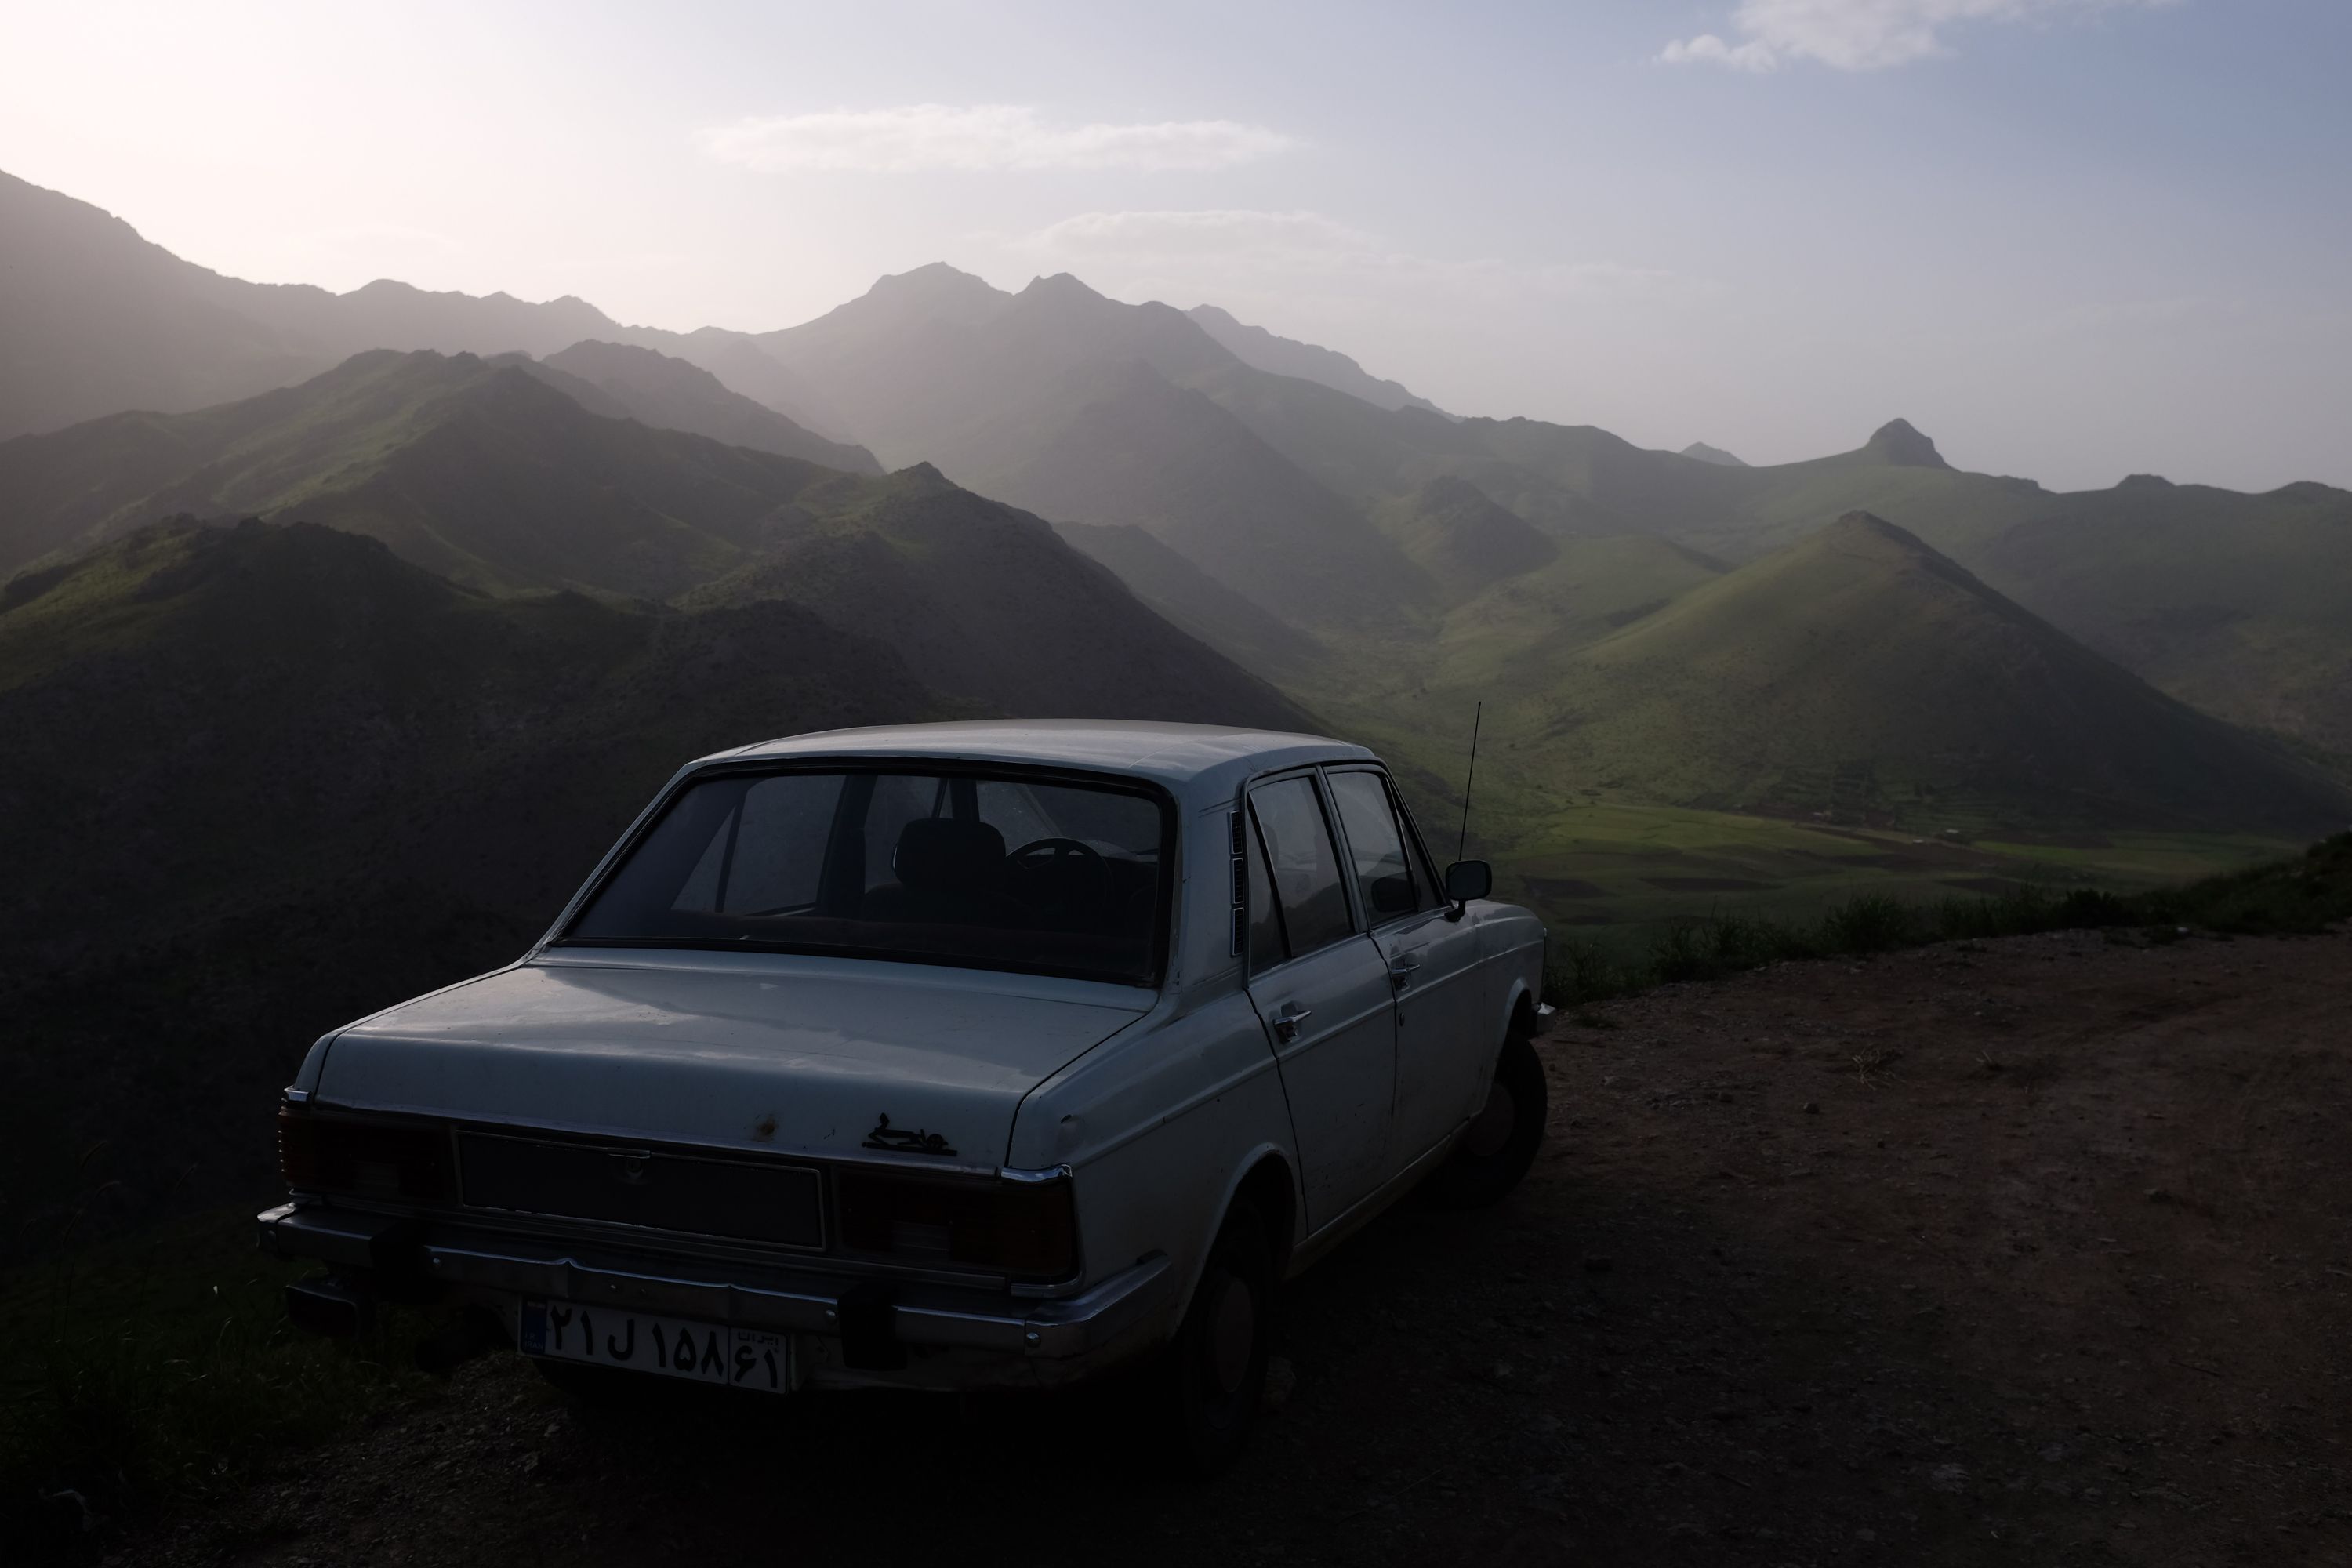 An old white sedan parked on a road with a view of rolling green hills.